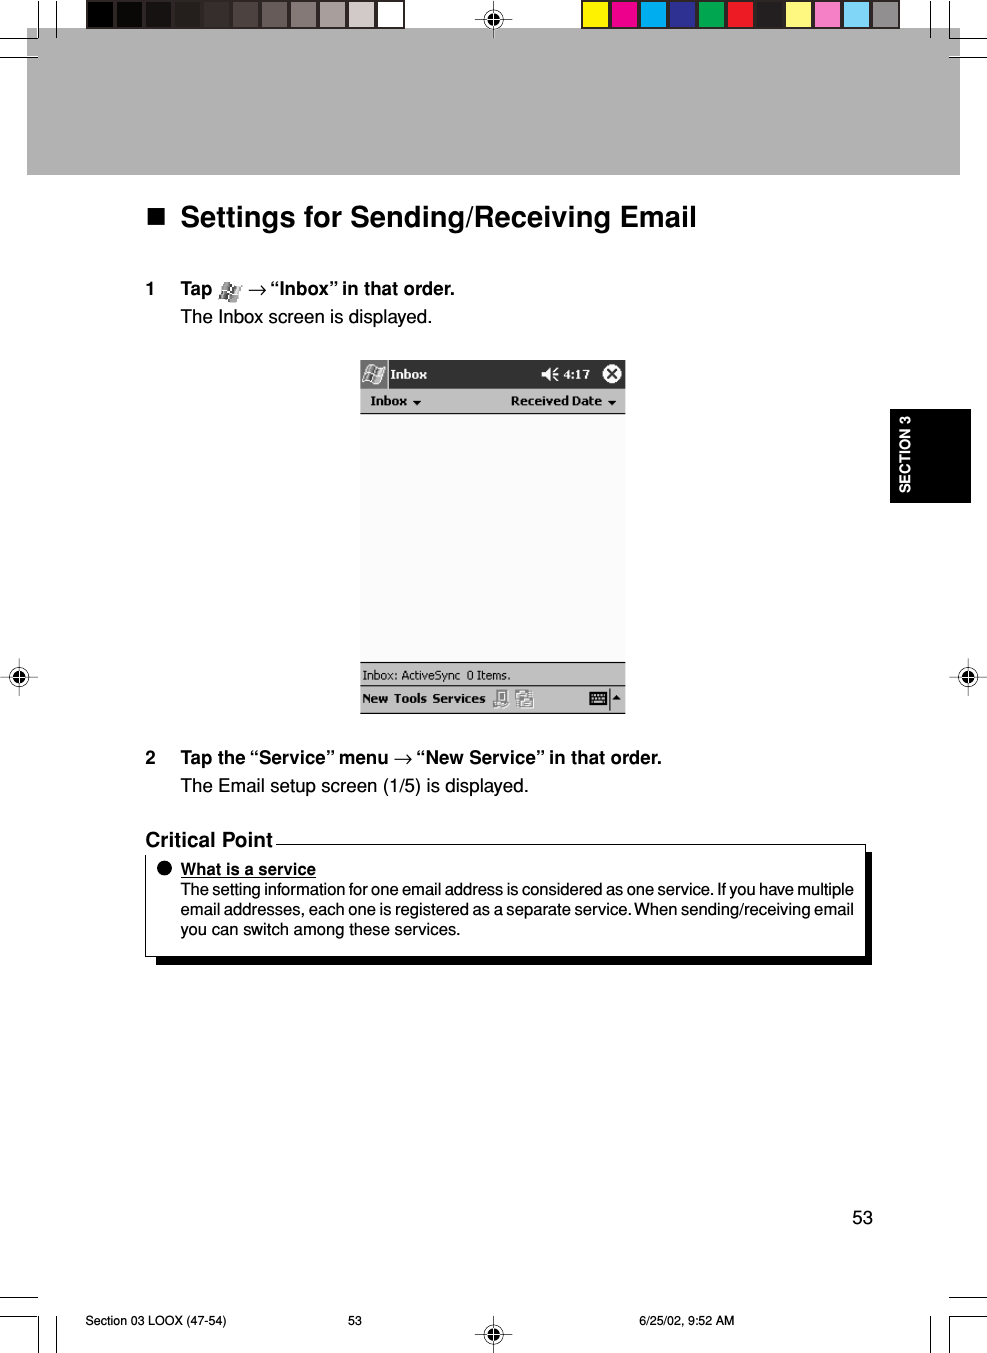 53SECTION 3Settings for Sending/Receiving Email1 Tap   → “Inbox” in that order.The Inbox screen is displayed.2 Tap the “Service” menu → “New Service” in that order.The Email setup screen (1/5) is displayed.Critical PointWhat is a serviceThe setting information for one email address is considered as one service. If you have multipleemail addresses, each one is registered as a separate service. When sending/receiving emailyou can switch among these services.Section 03 LOOX (47-54) 6/25/02, 9:52 AM53